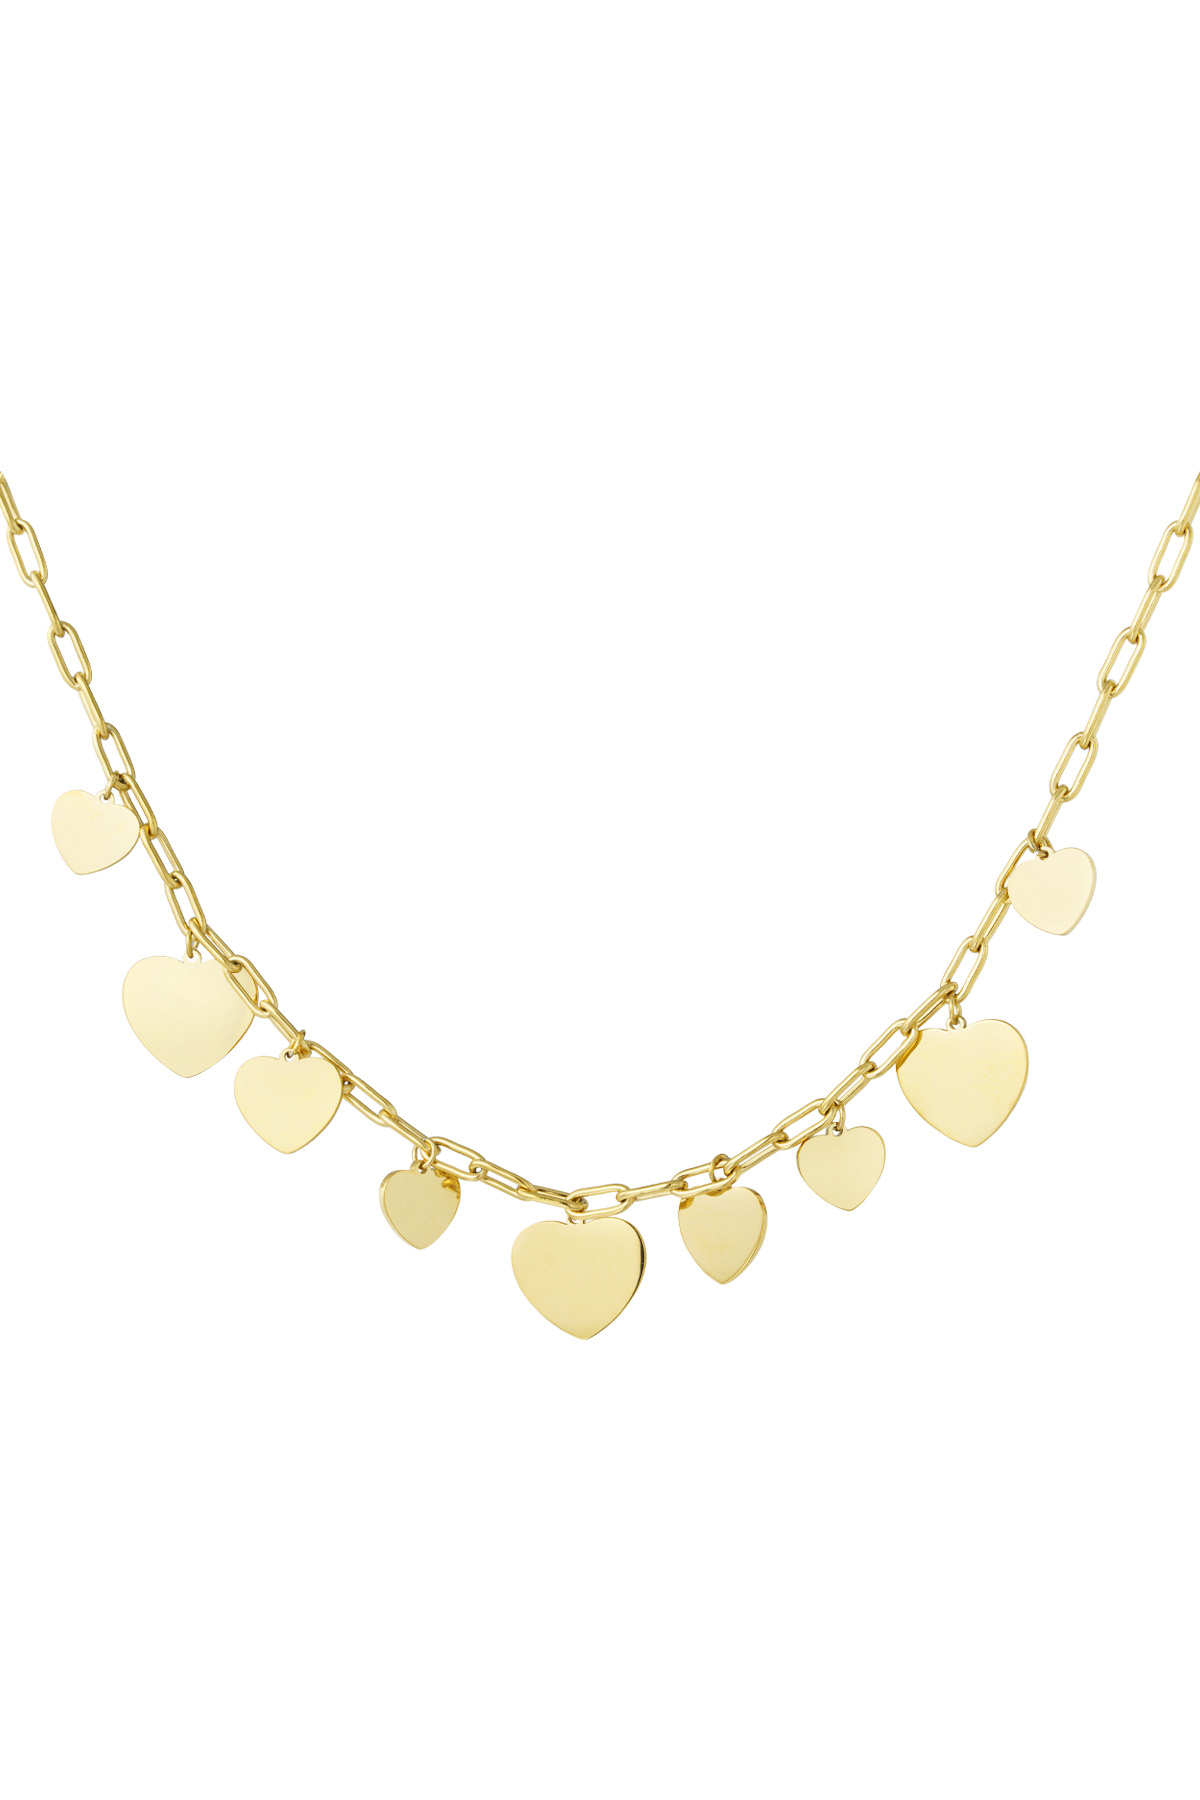 Chunky heart party necklace - gold